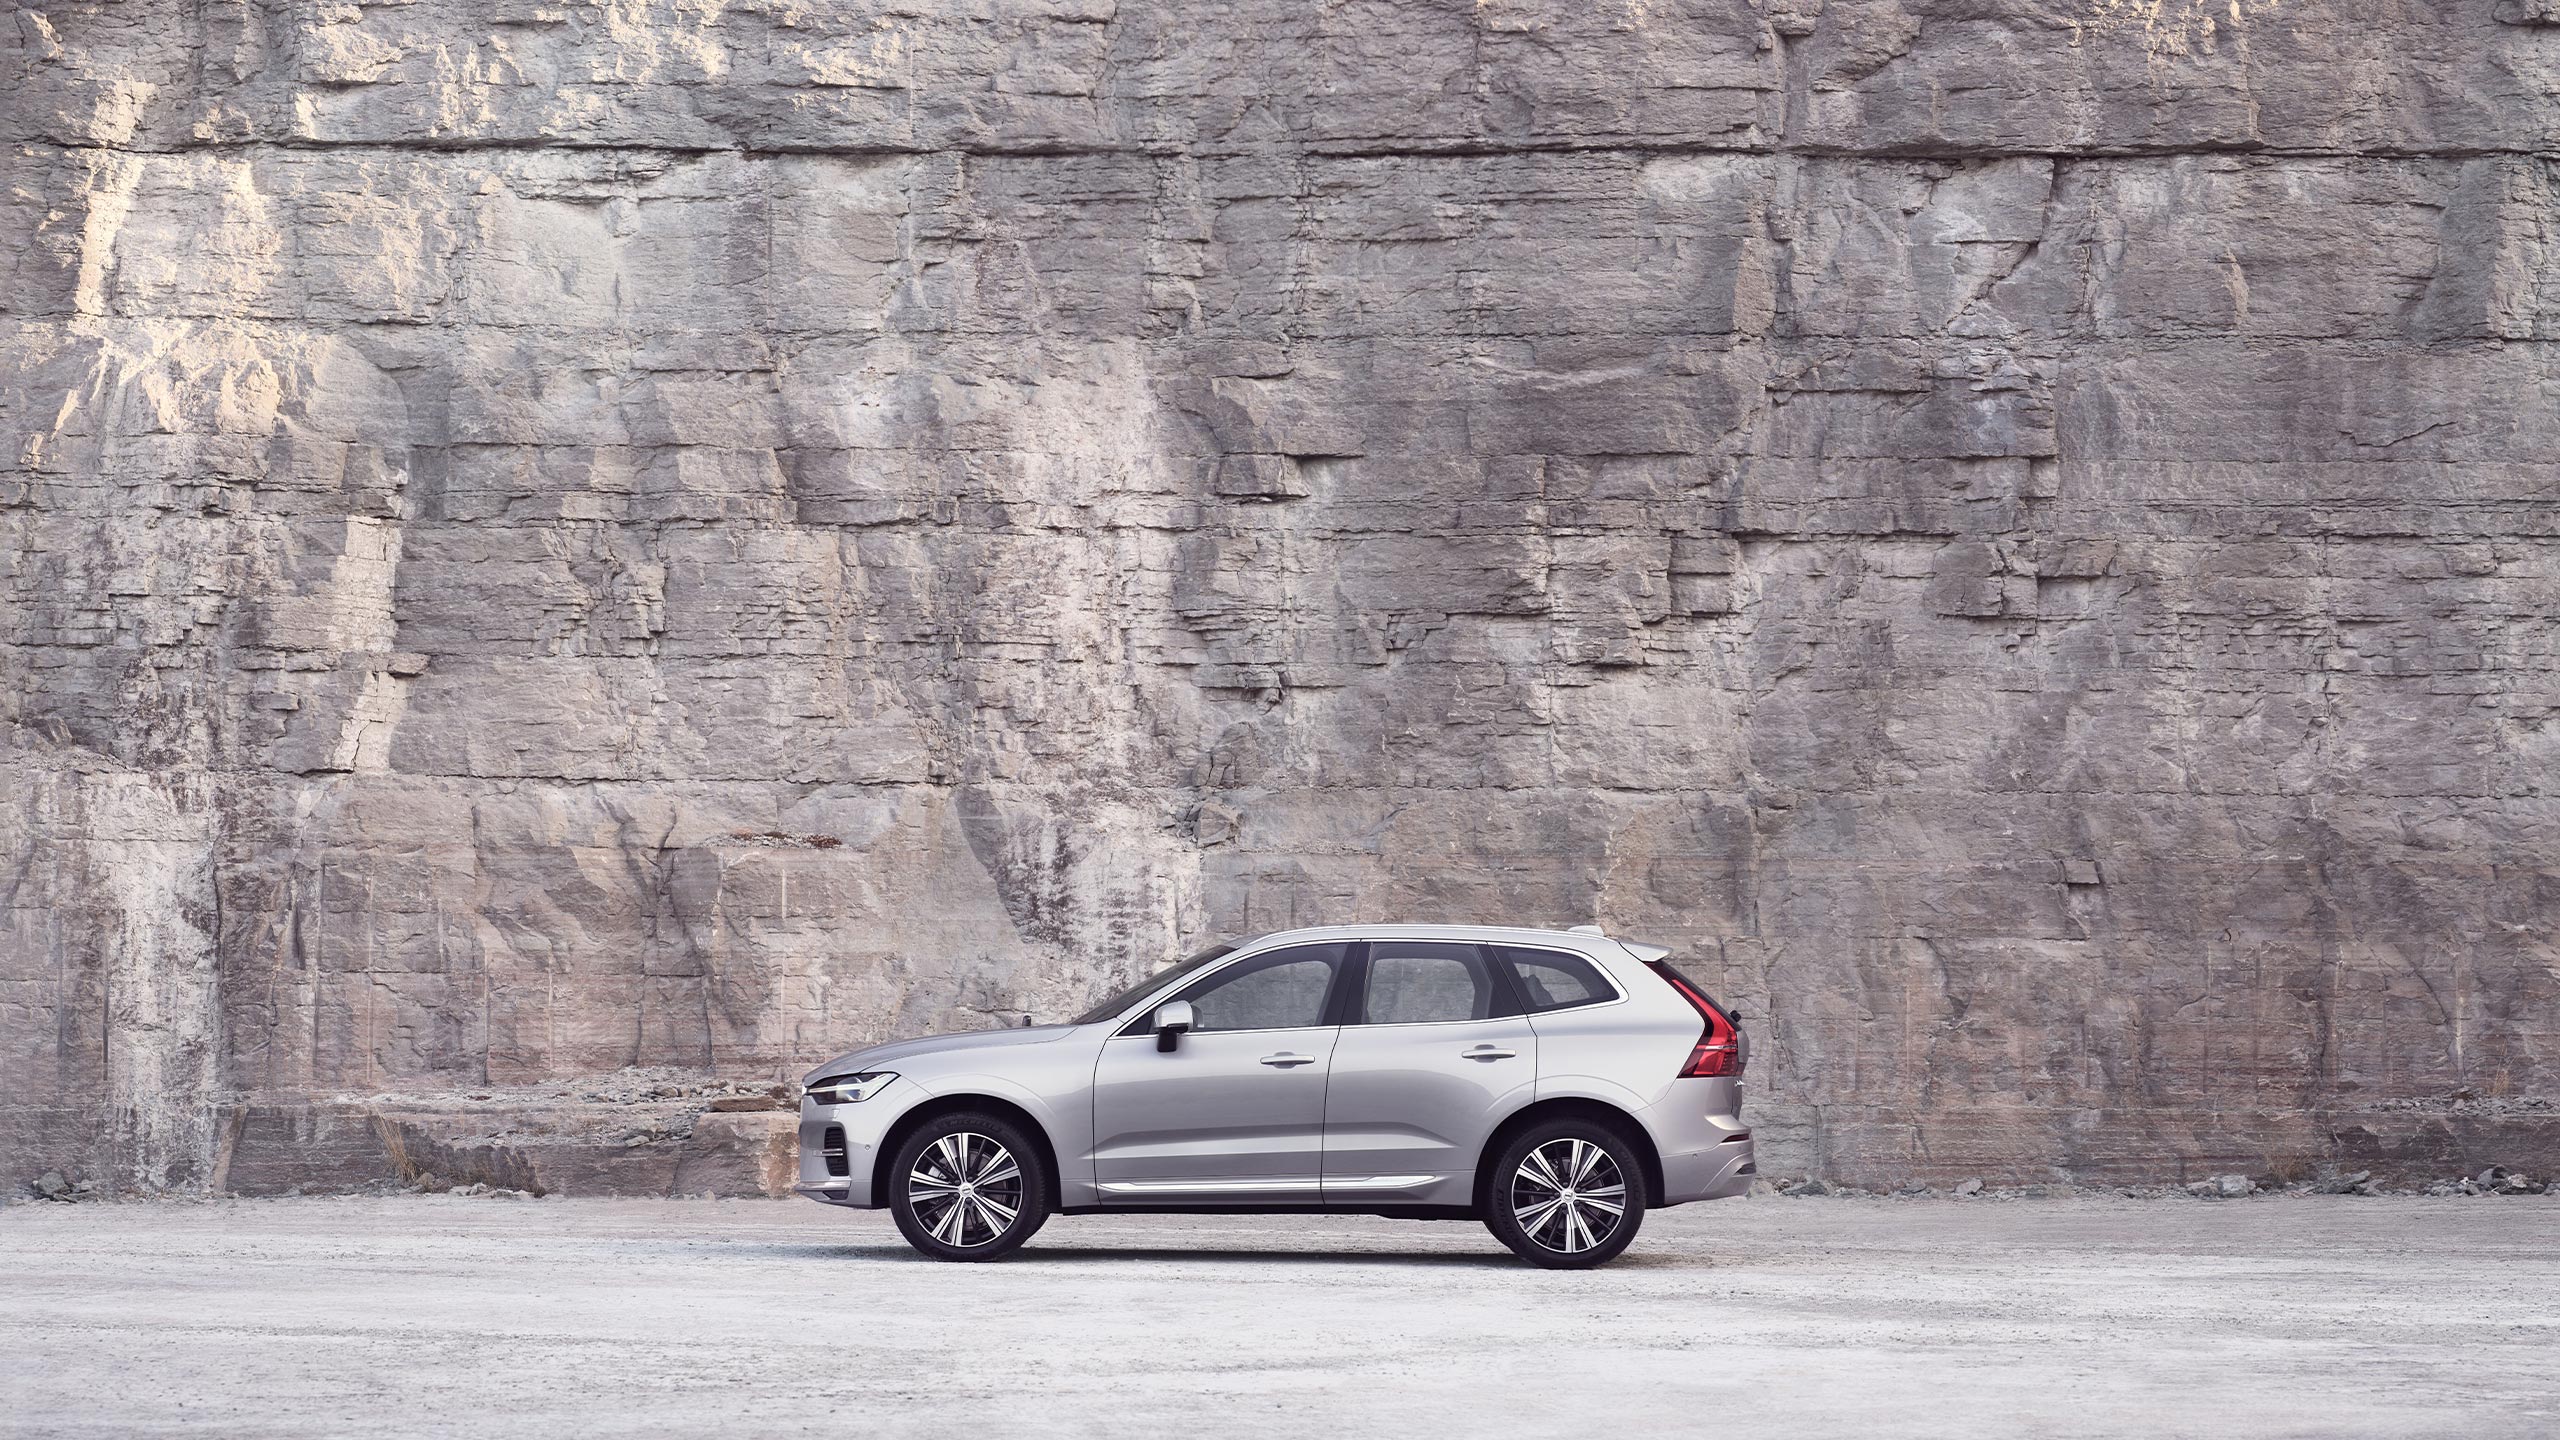 A Volvo XC60 standing still in front of a rock wall.